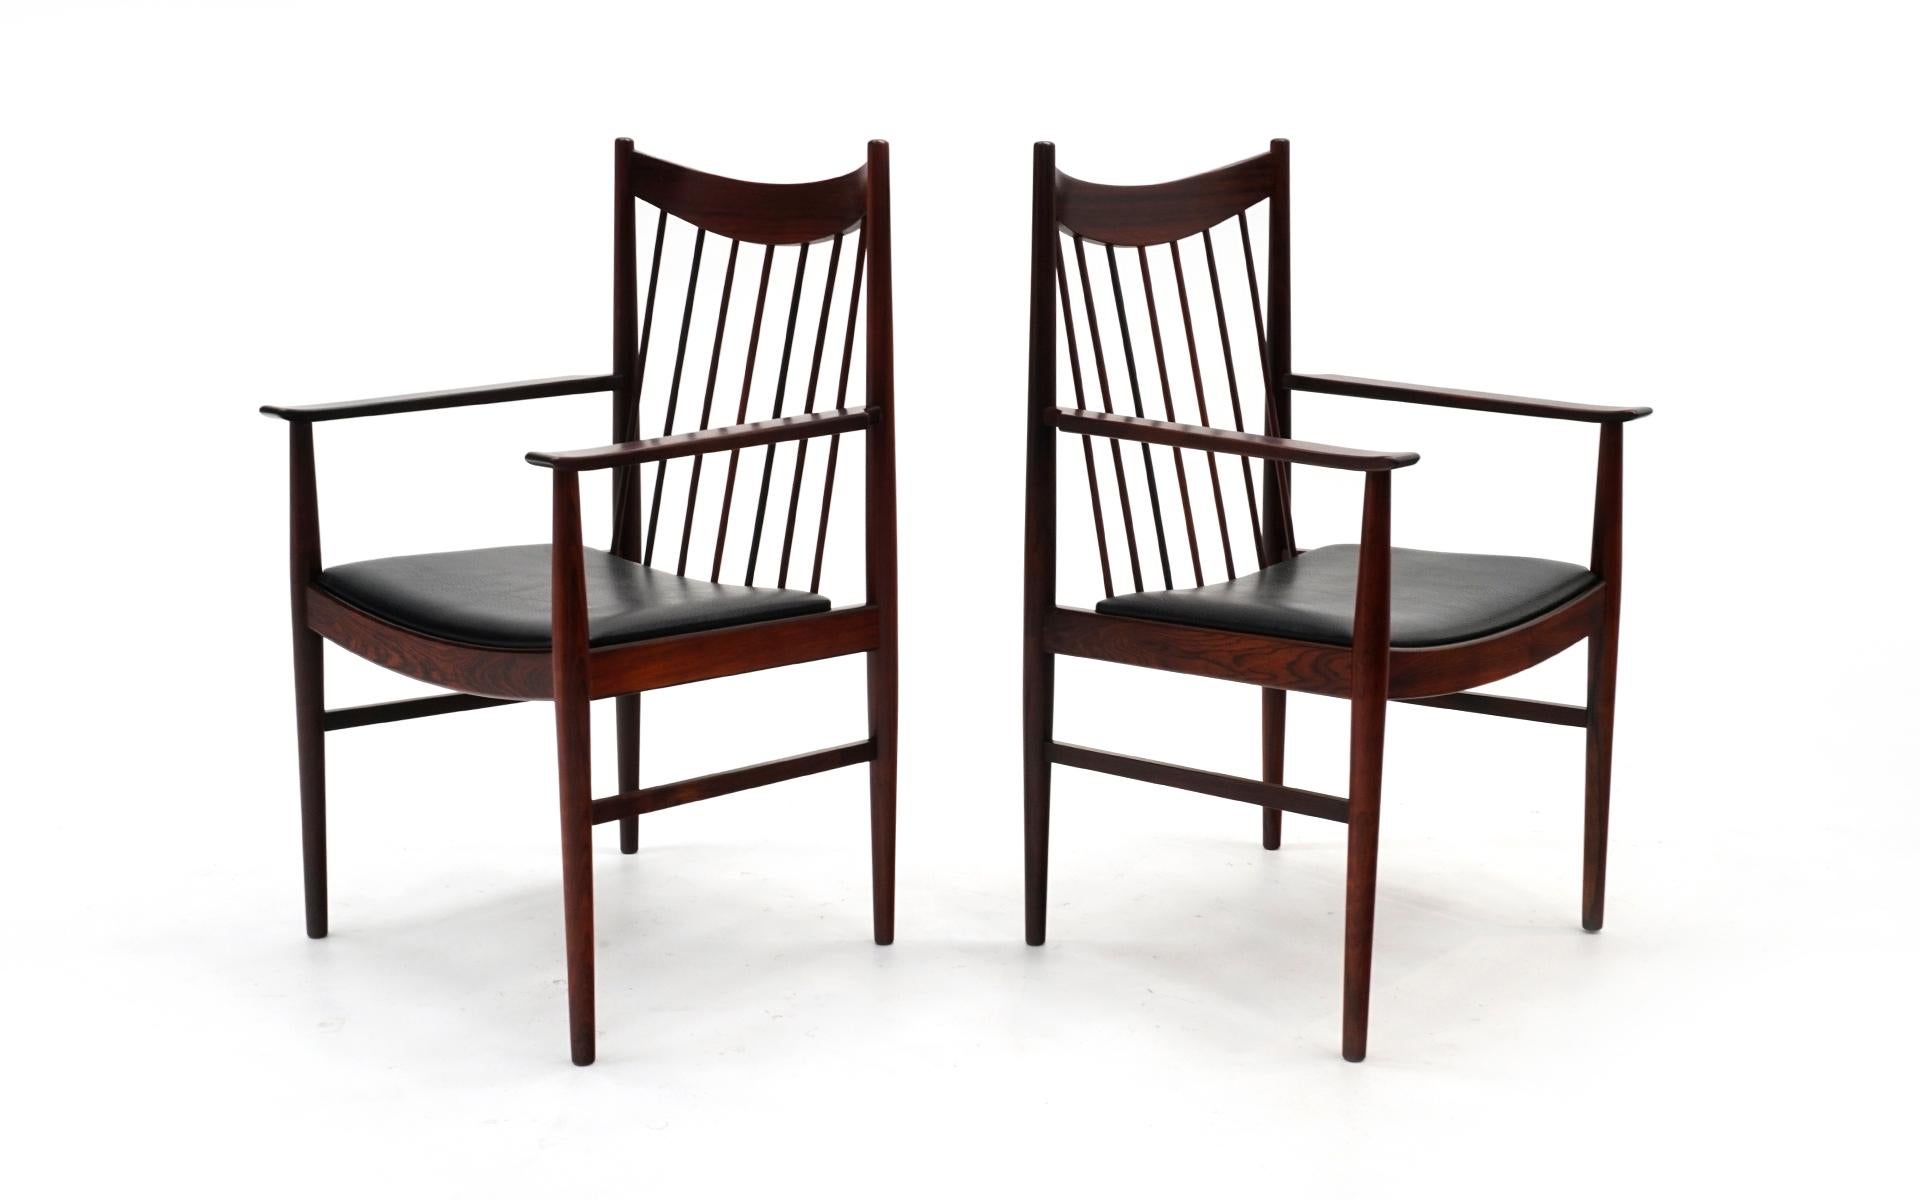 Scandinavian Modern Set of Six Rosewood Dining Chairs by Arne Vodder for Sibast, Black Seats